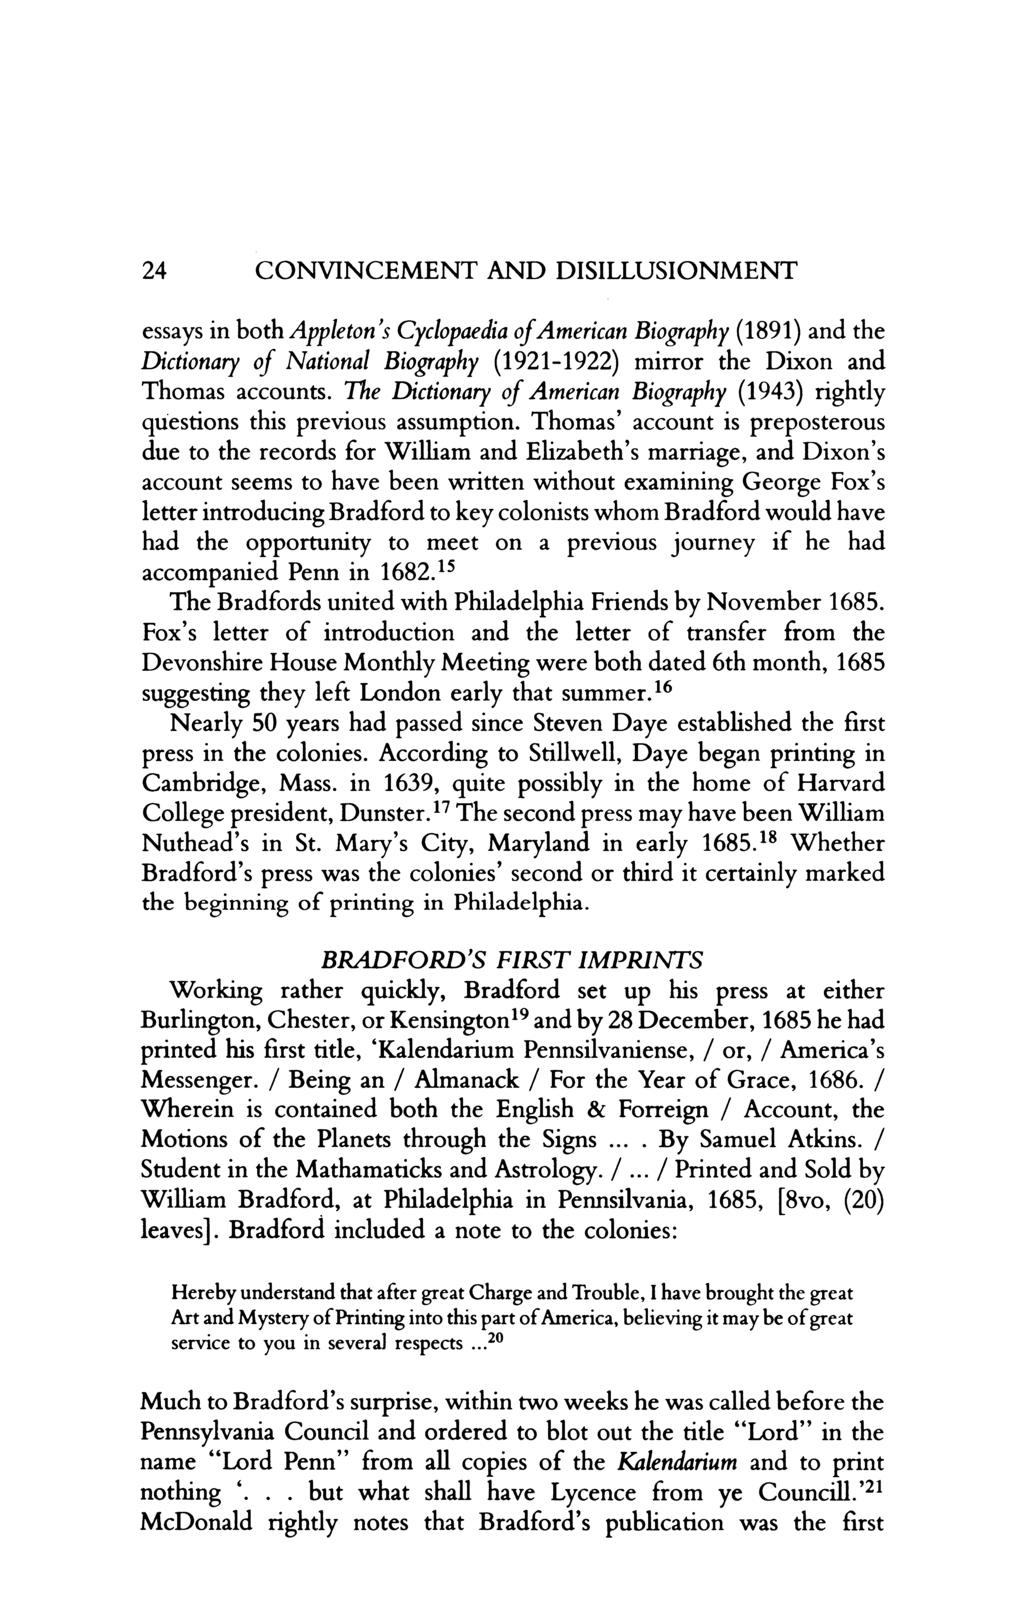 24 CONVINCEMENT AND DISILLUSIONMENT essays in both Apple ton's Cyclopaedia of American Biography (1891) and the Dictionary of National Biography (1921-1922) mirror the Dixon and Thomas accounts.